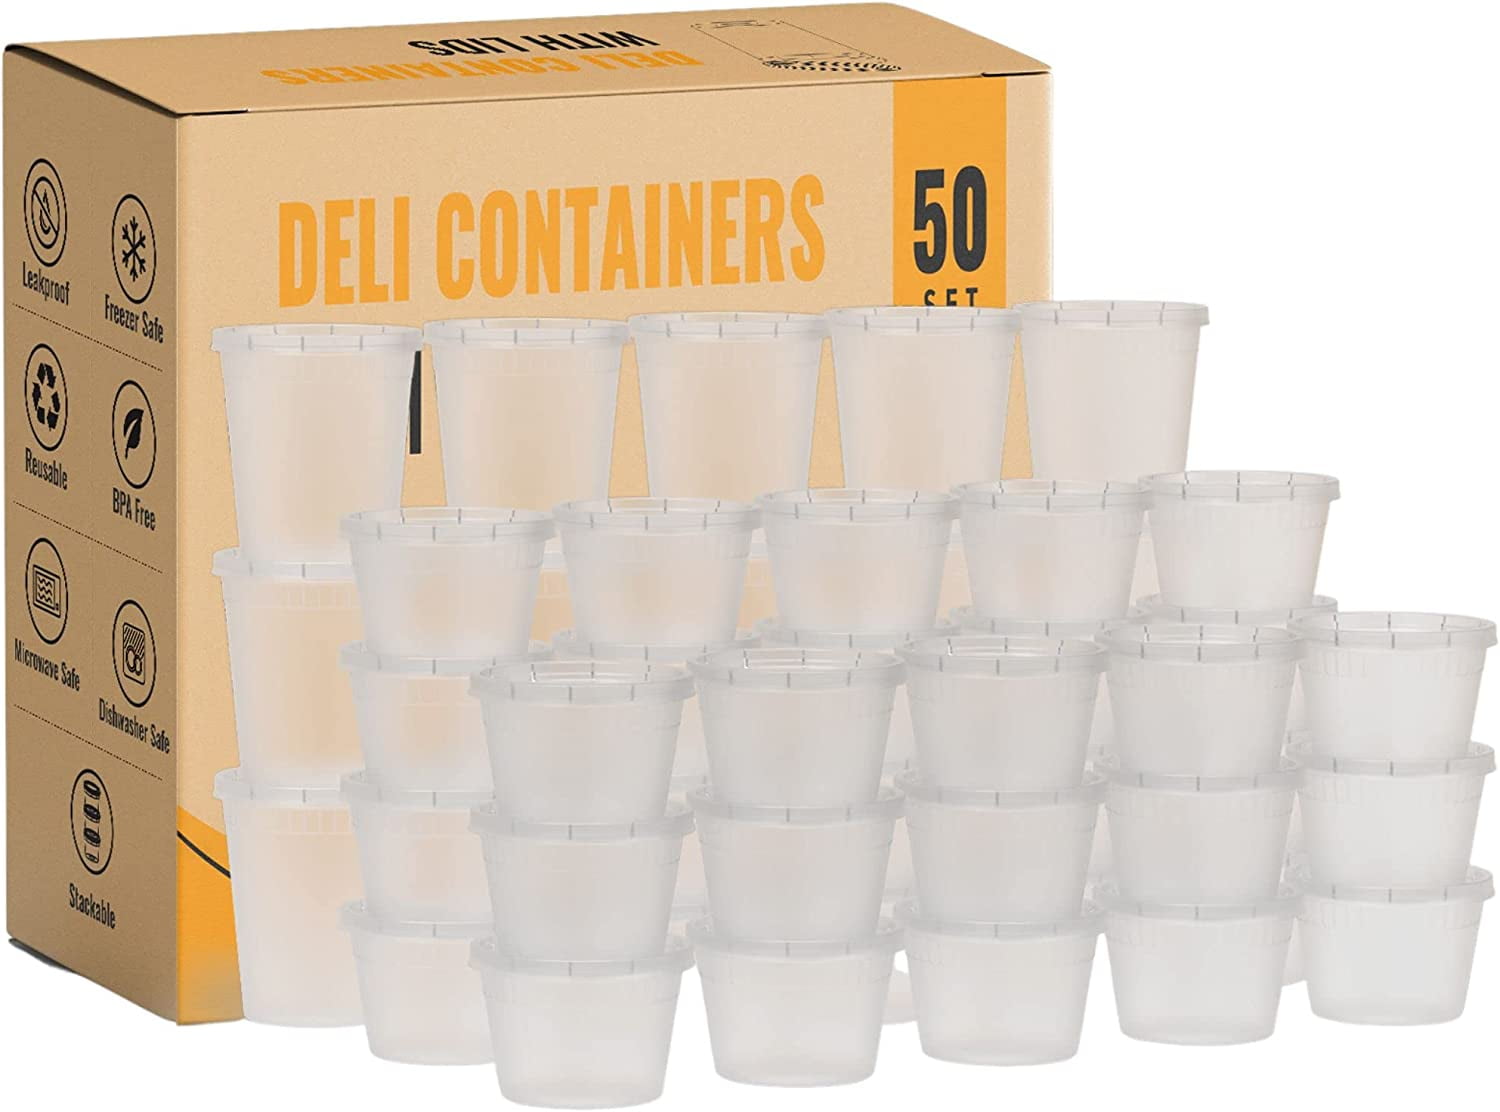  BluShine [12 Sets - 64 oz.] Plastic Deli Food Storage Containers  with Airtight Leak Proof Lids - Washable And Reusable - Recyclable BPA-Free  - Microwave, Fridge, and Freezer Safe: Home & Kitchen